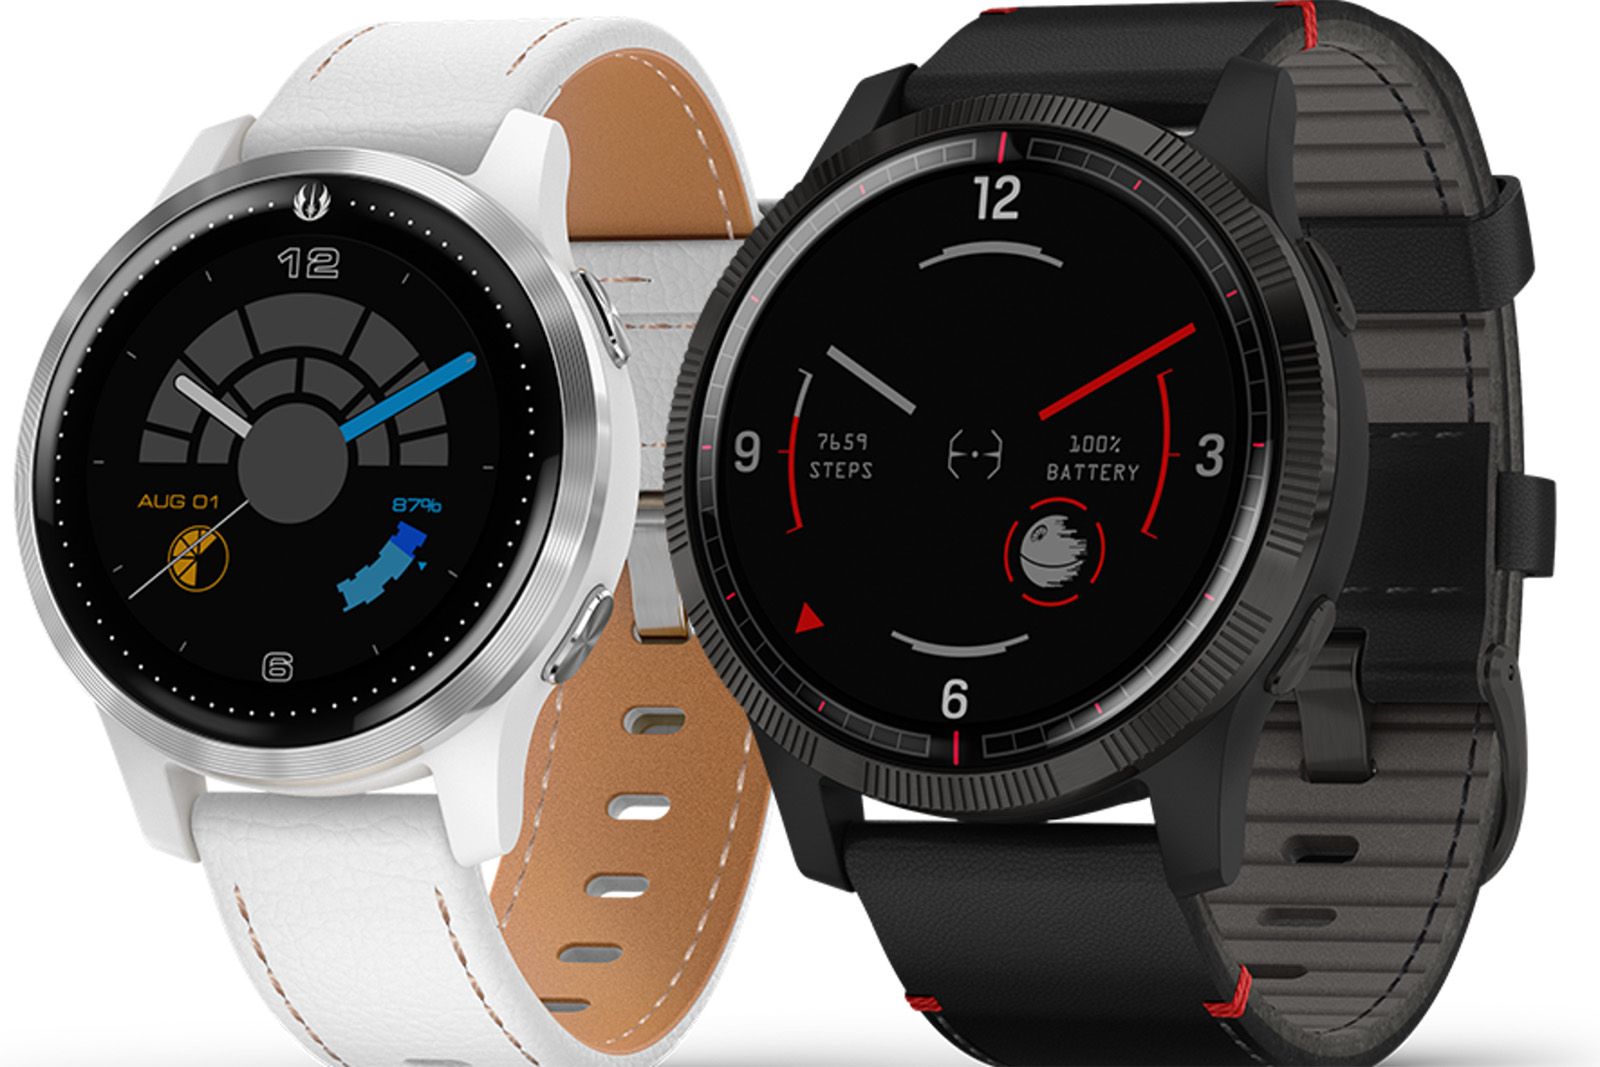 Garmin Legacy Saga Star Wars smartwatches will bring out the light or dark side in you image 1